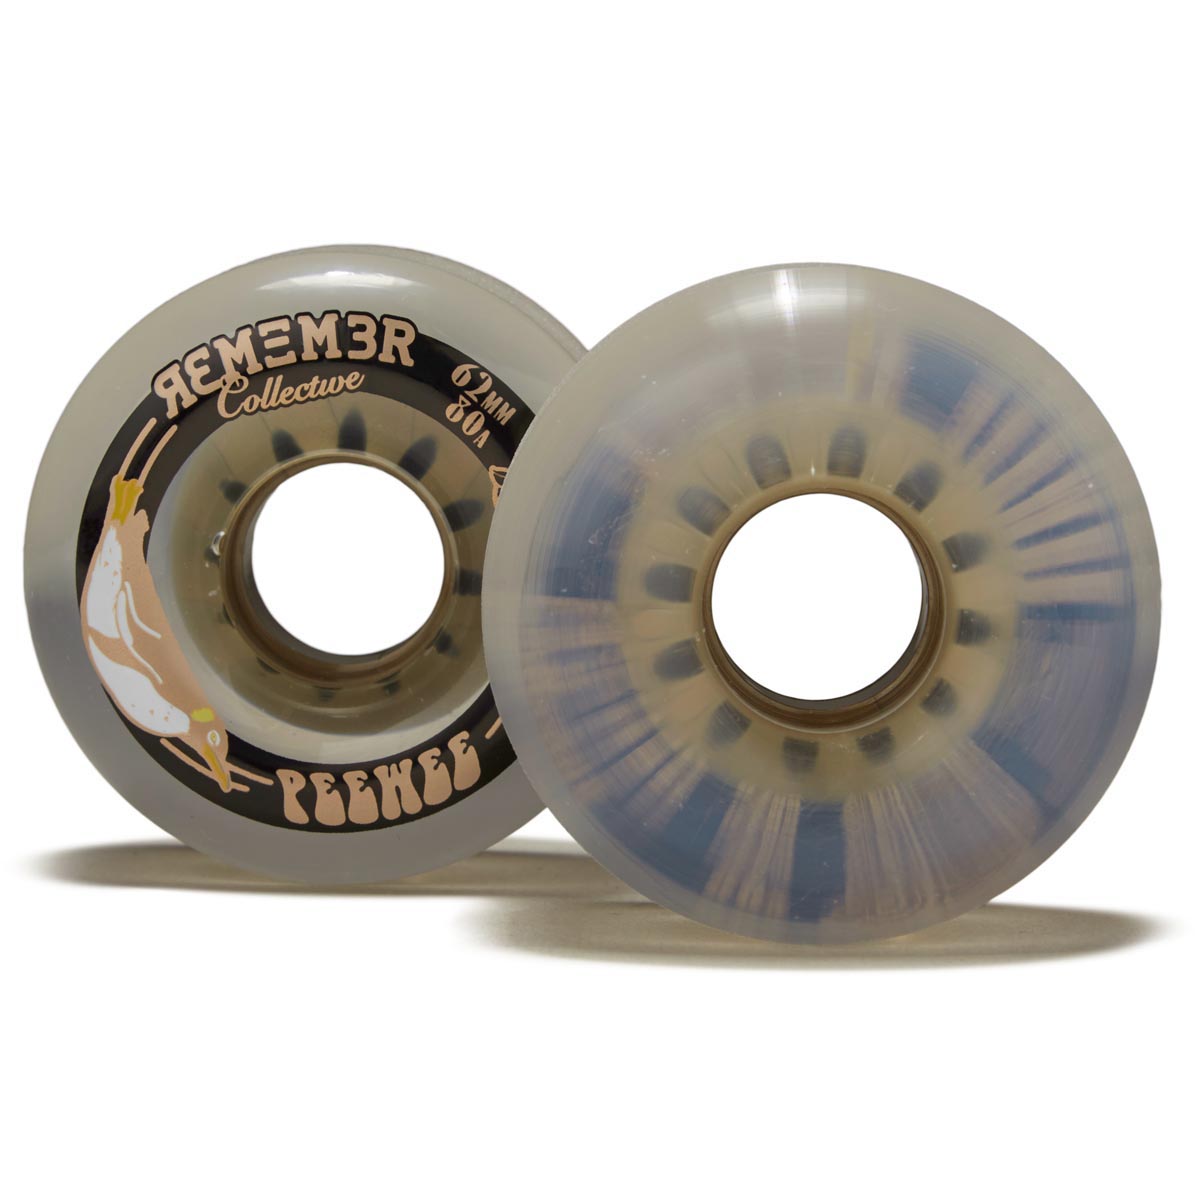 Remember Peewee 80a Longboard Wheels - Translucent - 62mm image 3